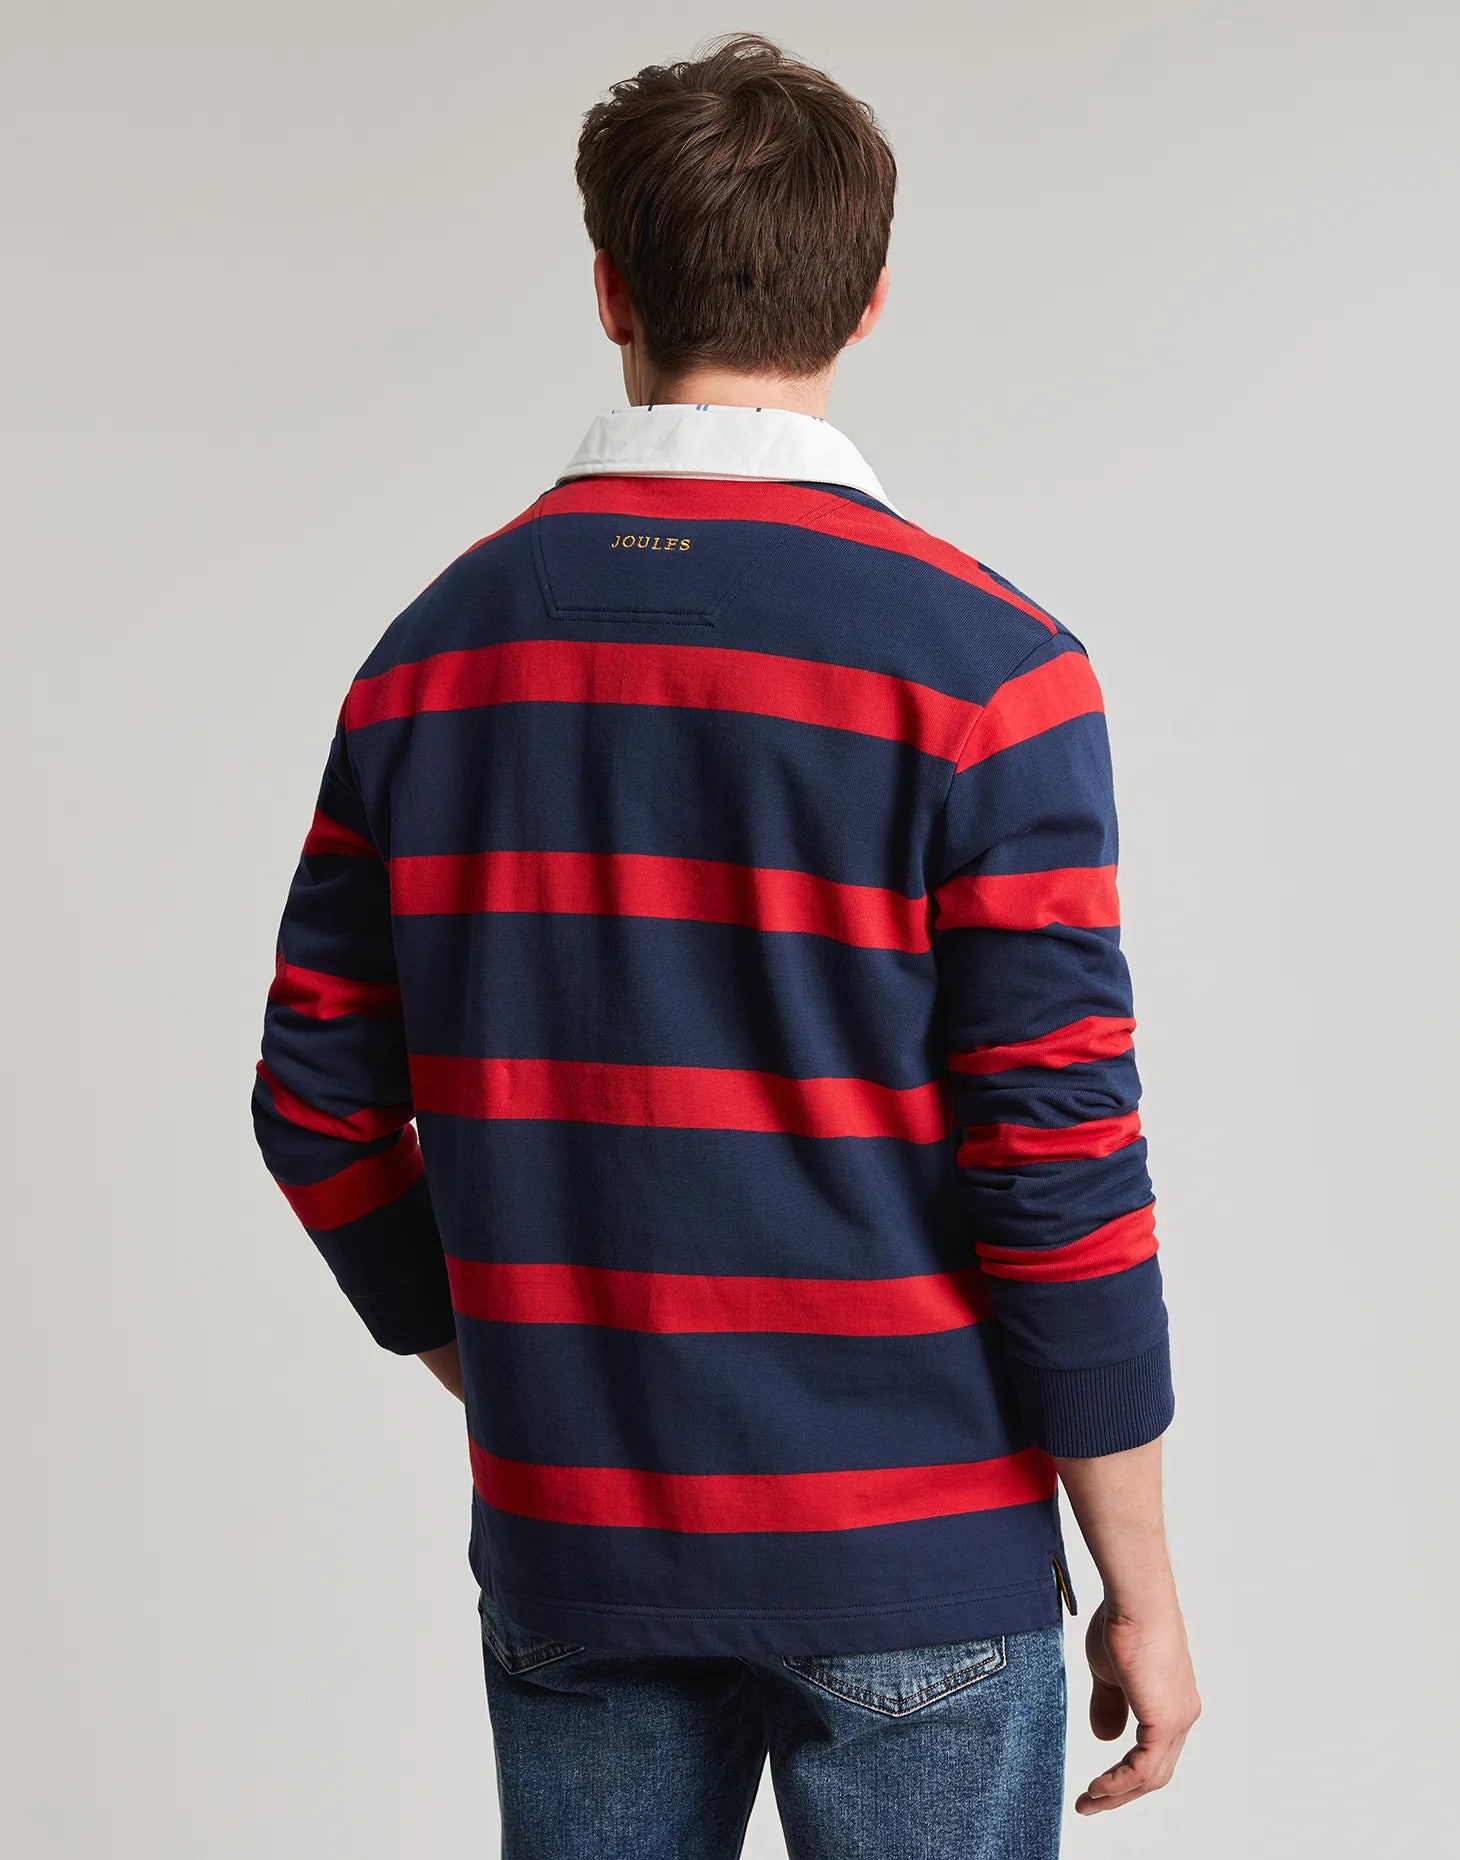 Onside Rugby Shirt - Navy Red Stripe